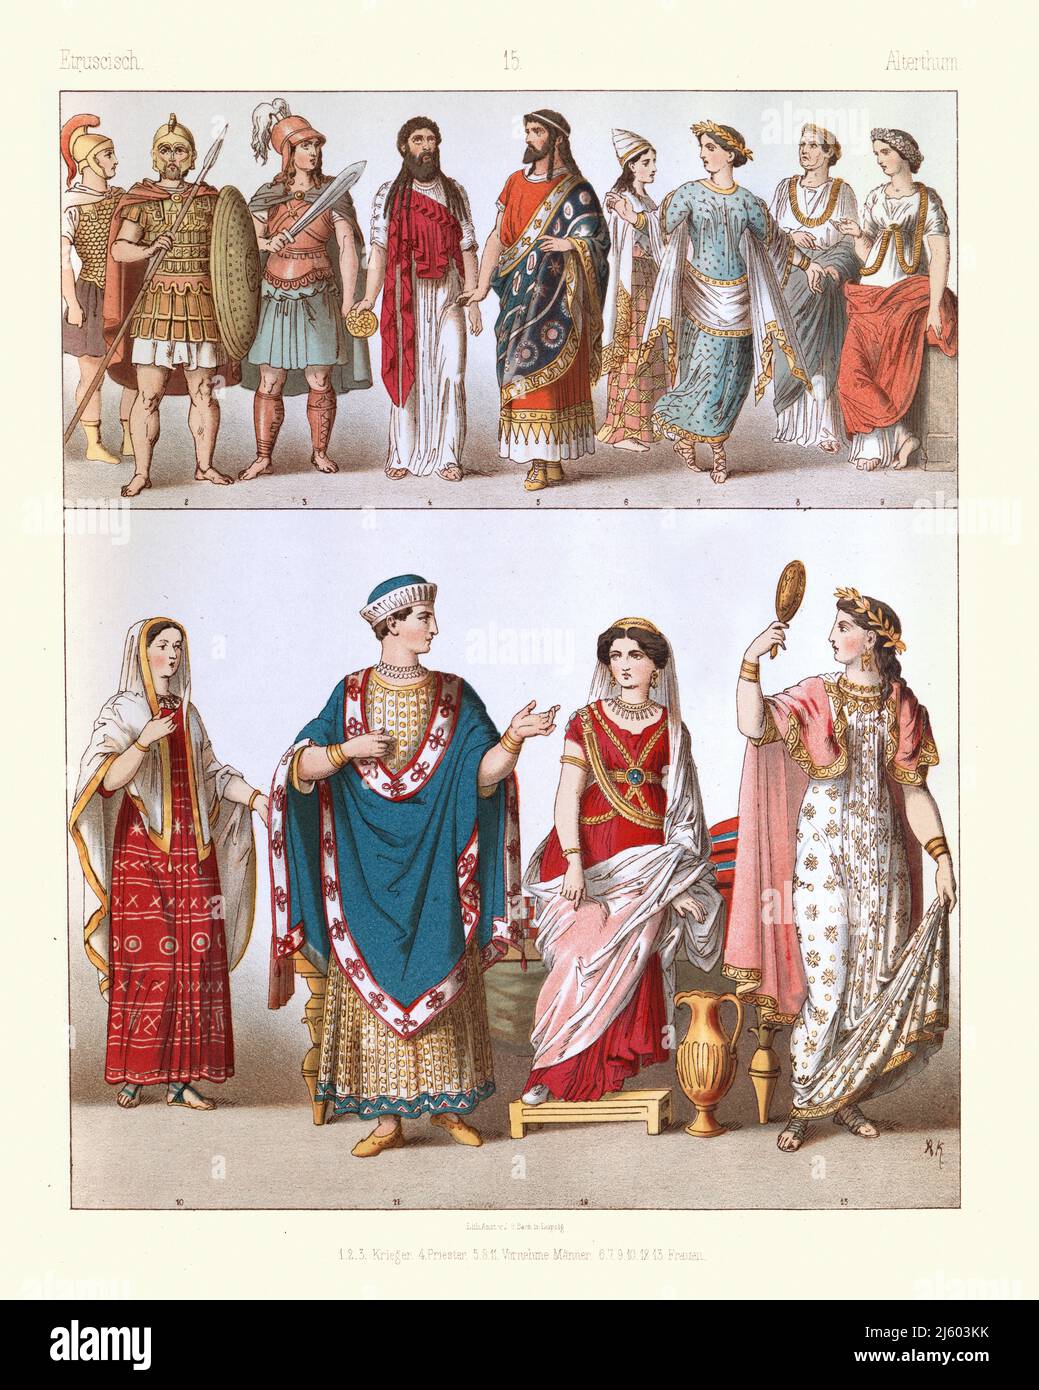 Etruscan costumes and fashion, Ancient history, Antiquity, Warrior, Soldier, Priest, Noble man and woman Stock Photo